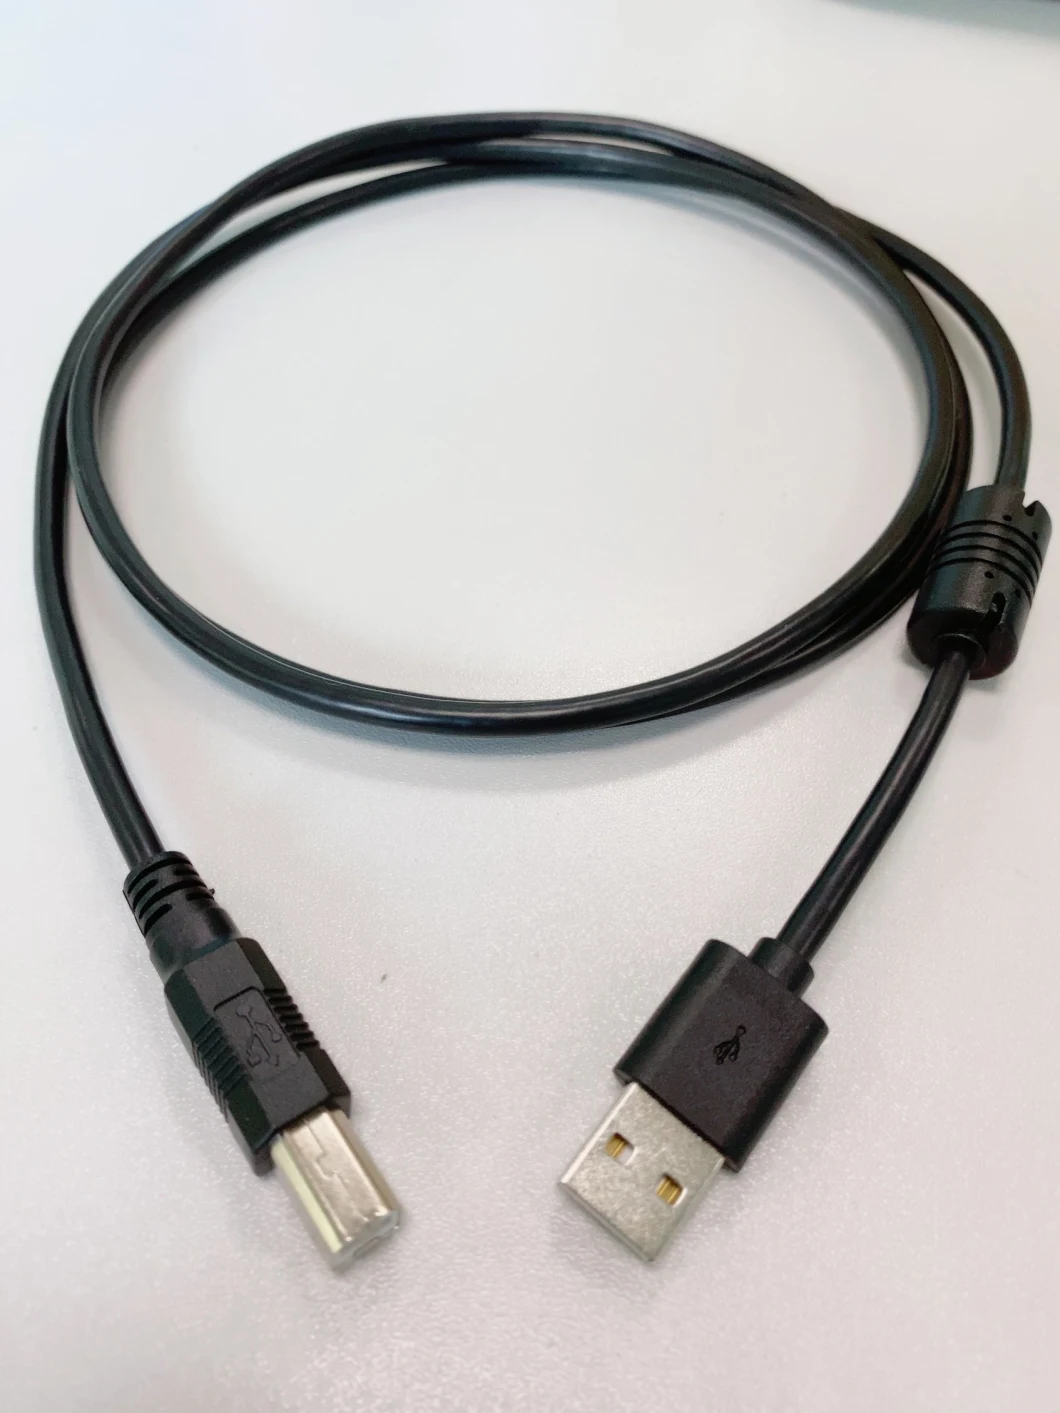 USB 2.0 a to B Cable White Black for Printers, Scanners, Brother, Canon, DELL, Epson, HP